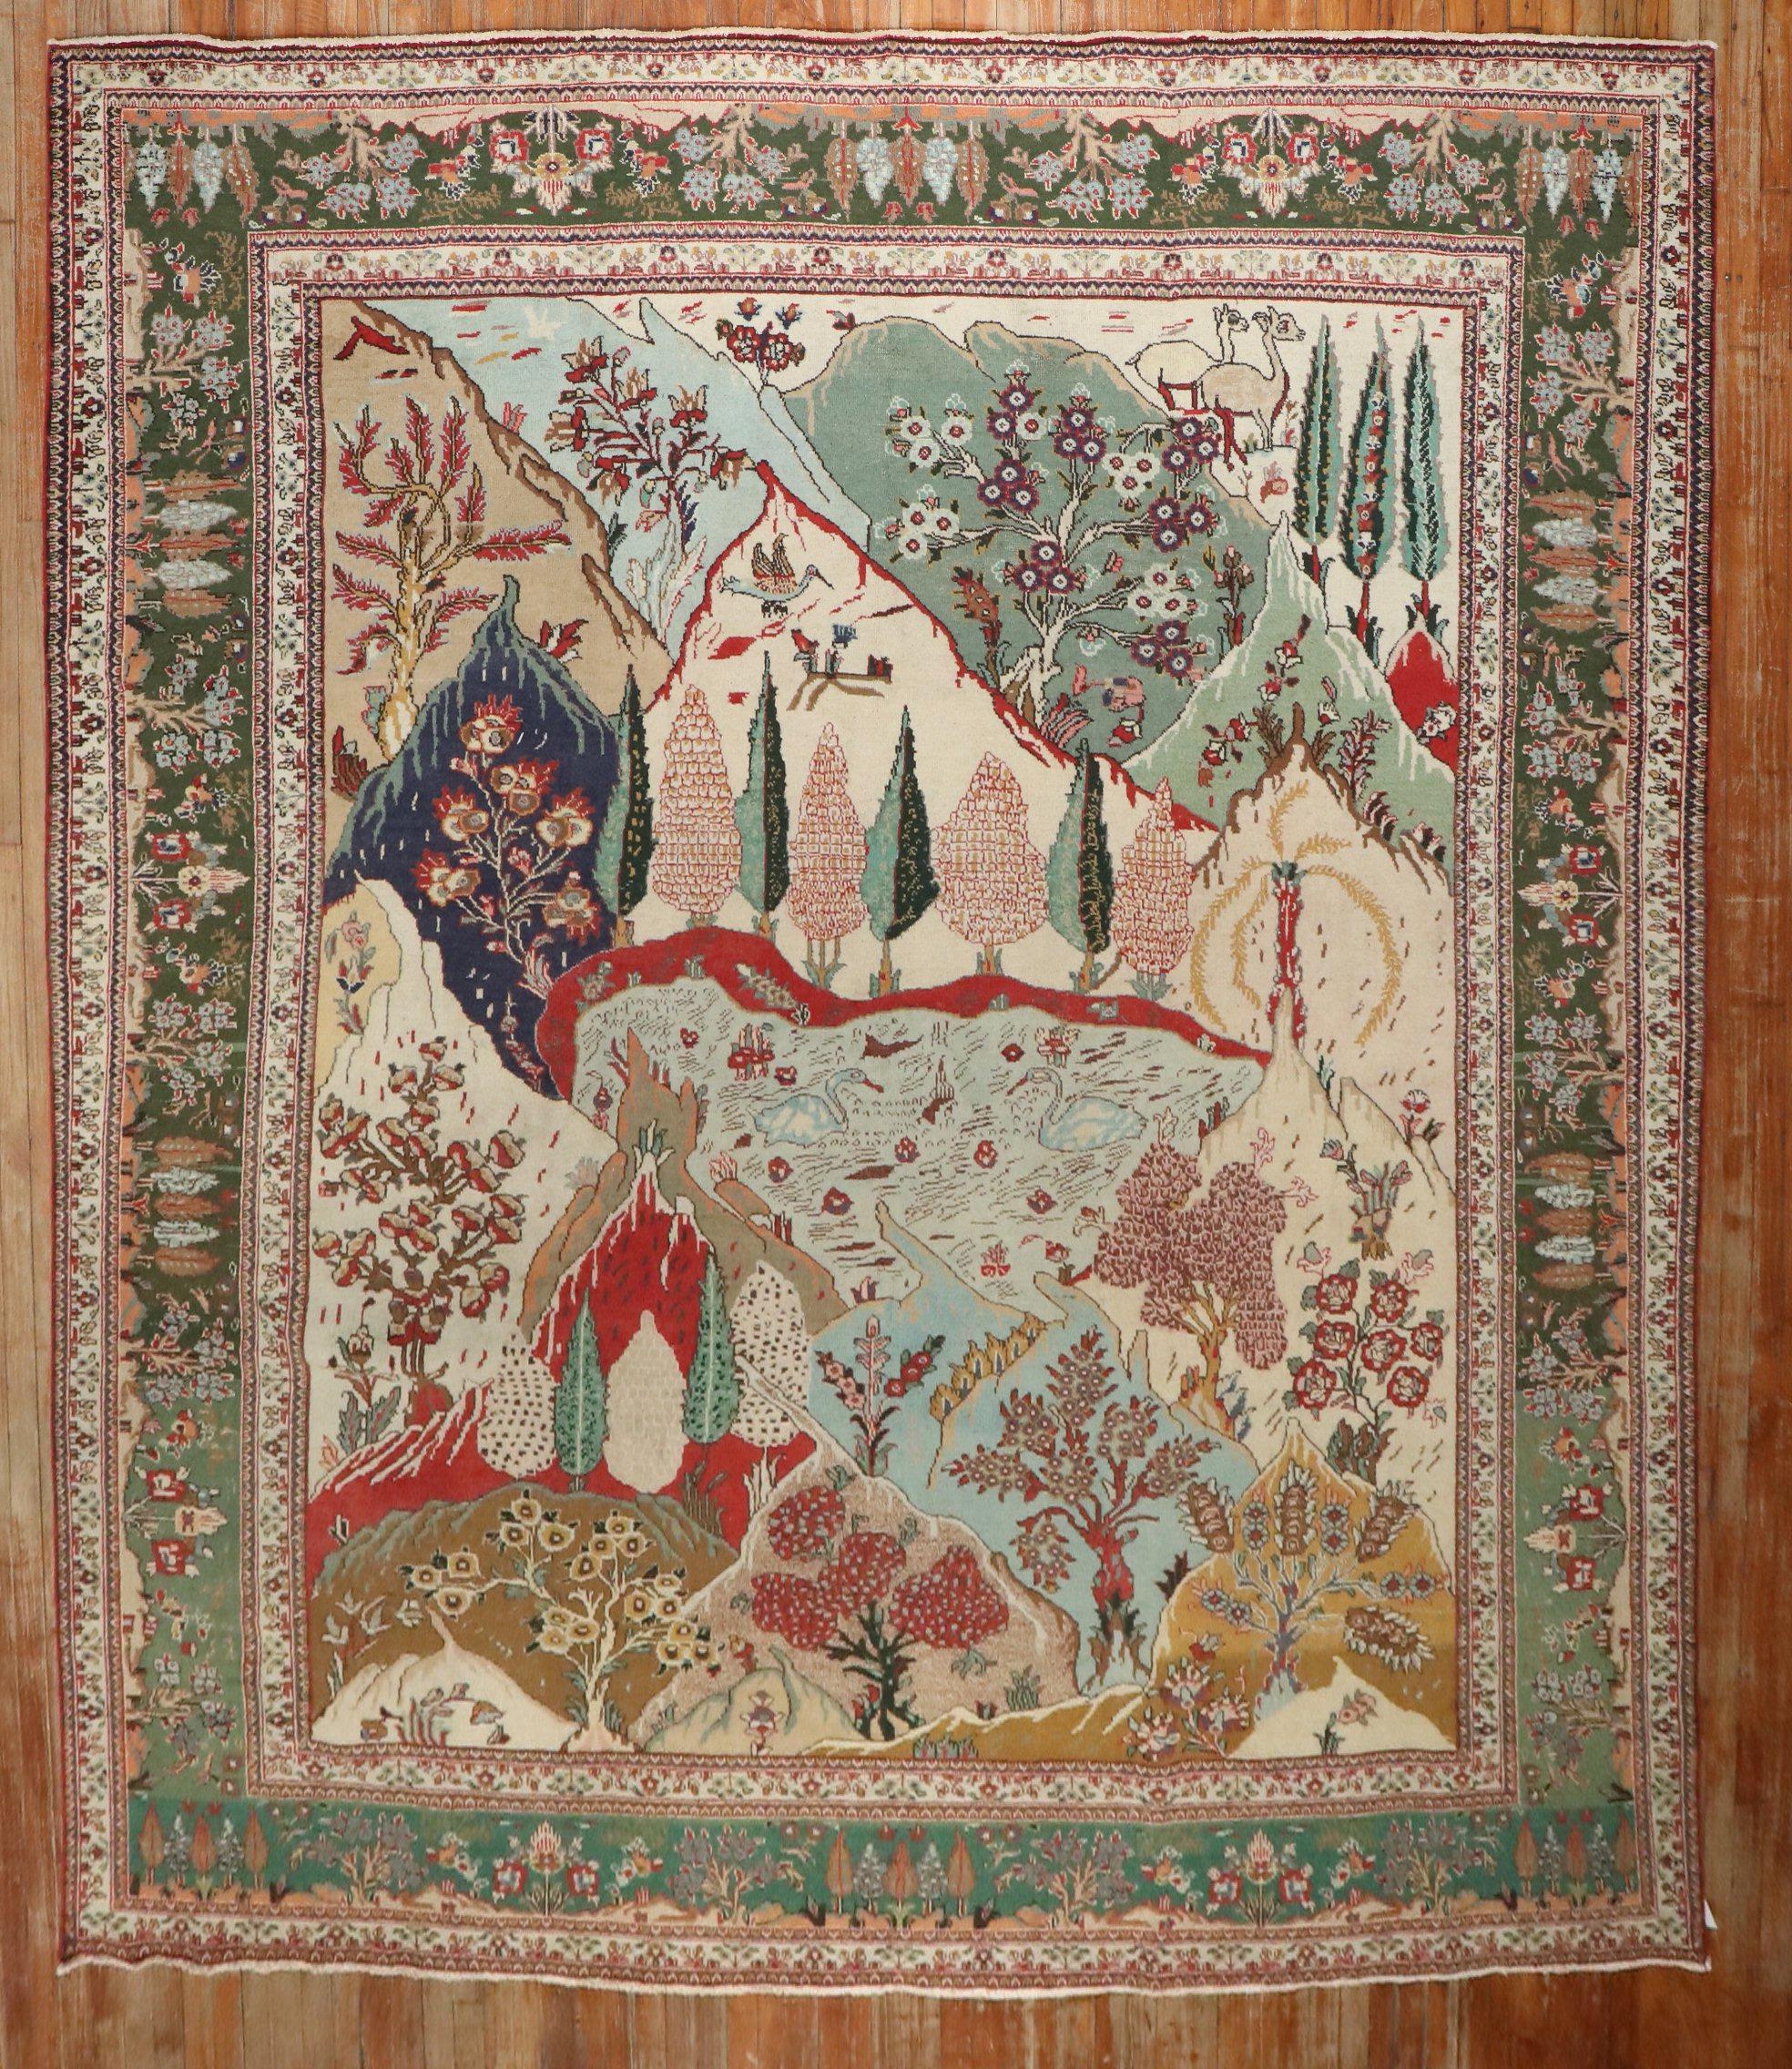 1930s Persian Tabriz rug with a pictorial scenery design

rug no.	j3838
size	10' x 12' 10